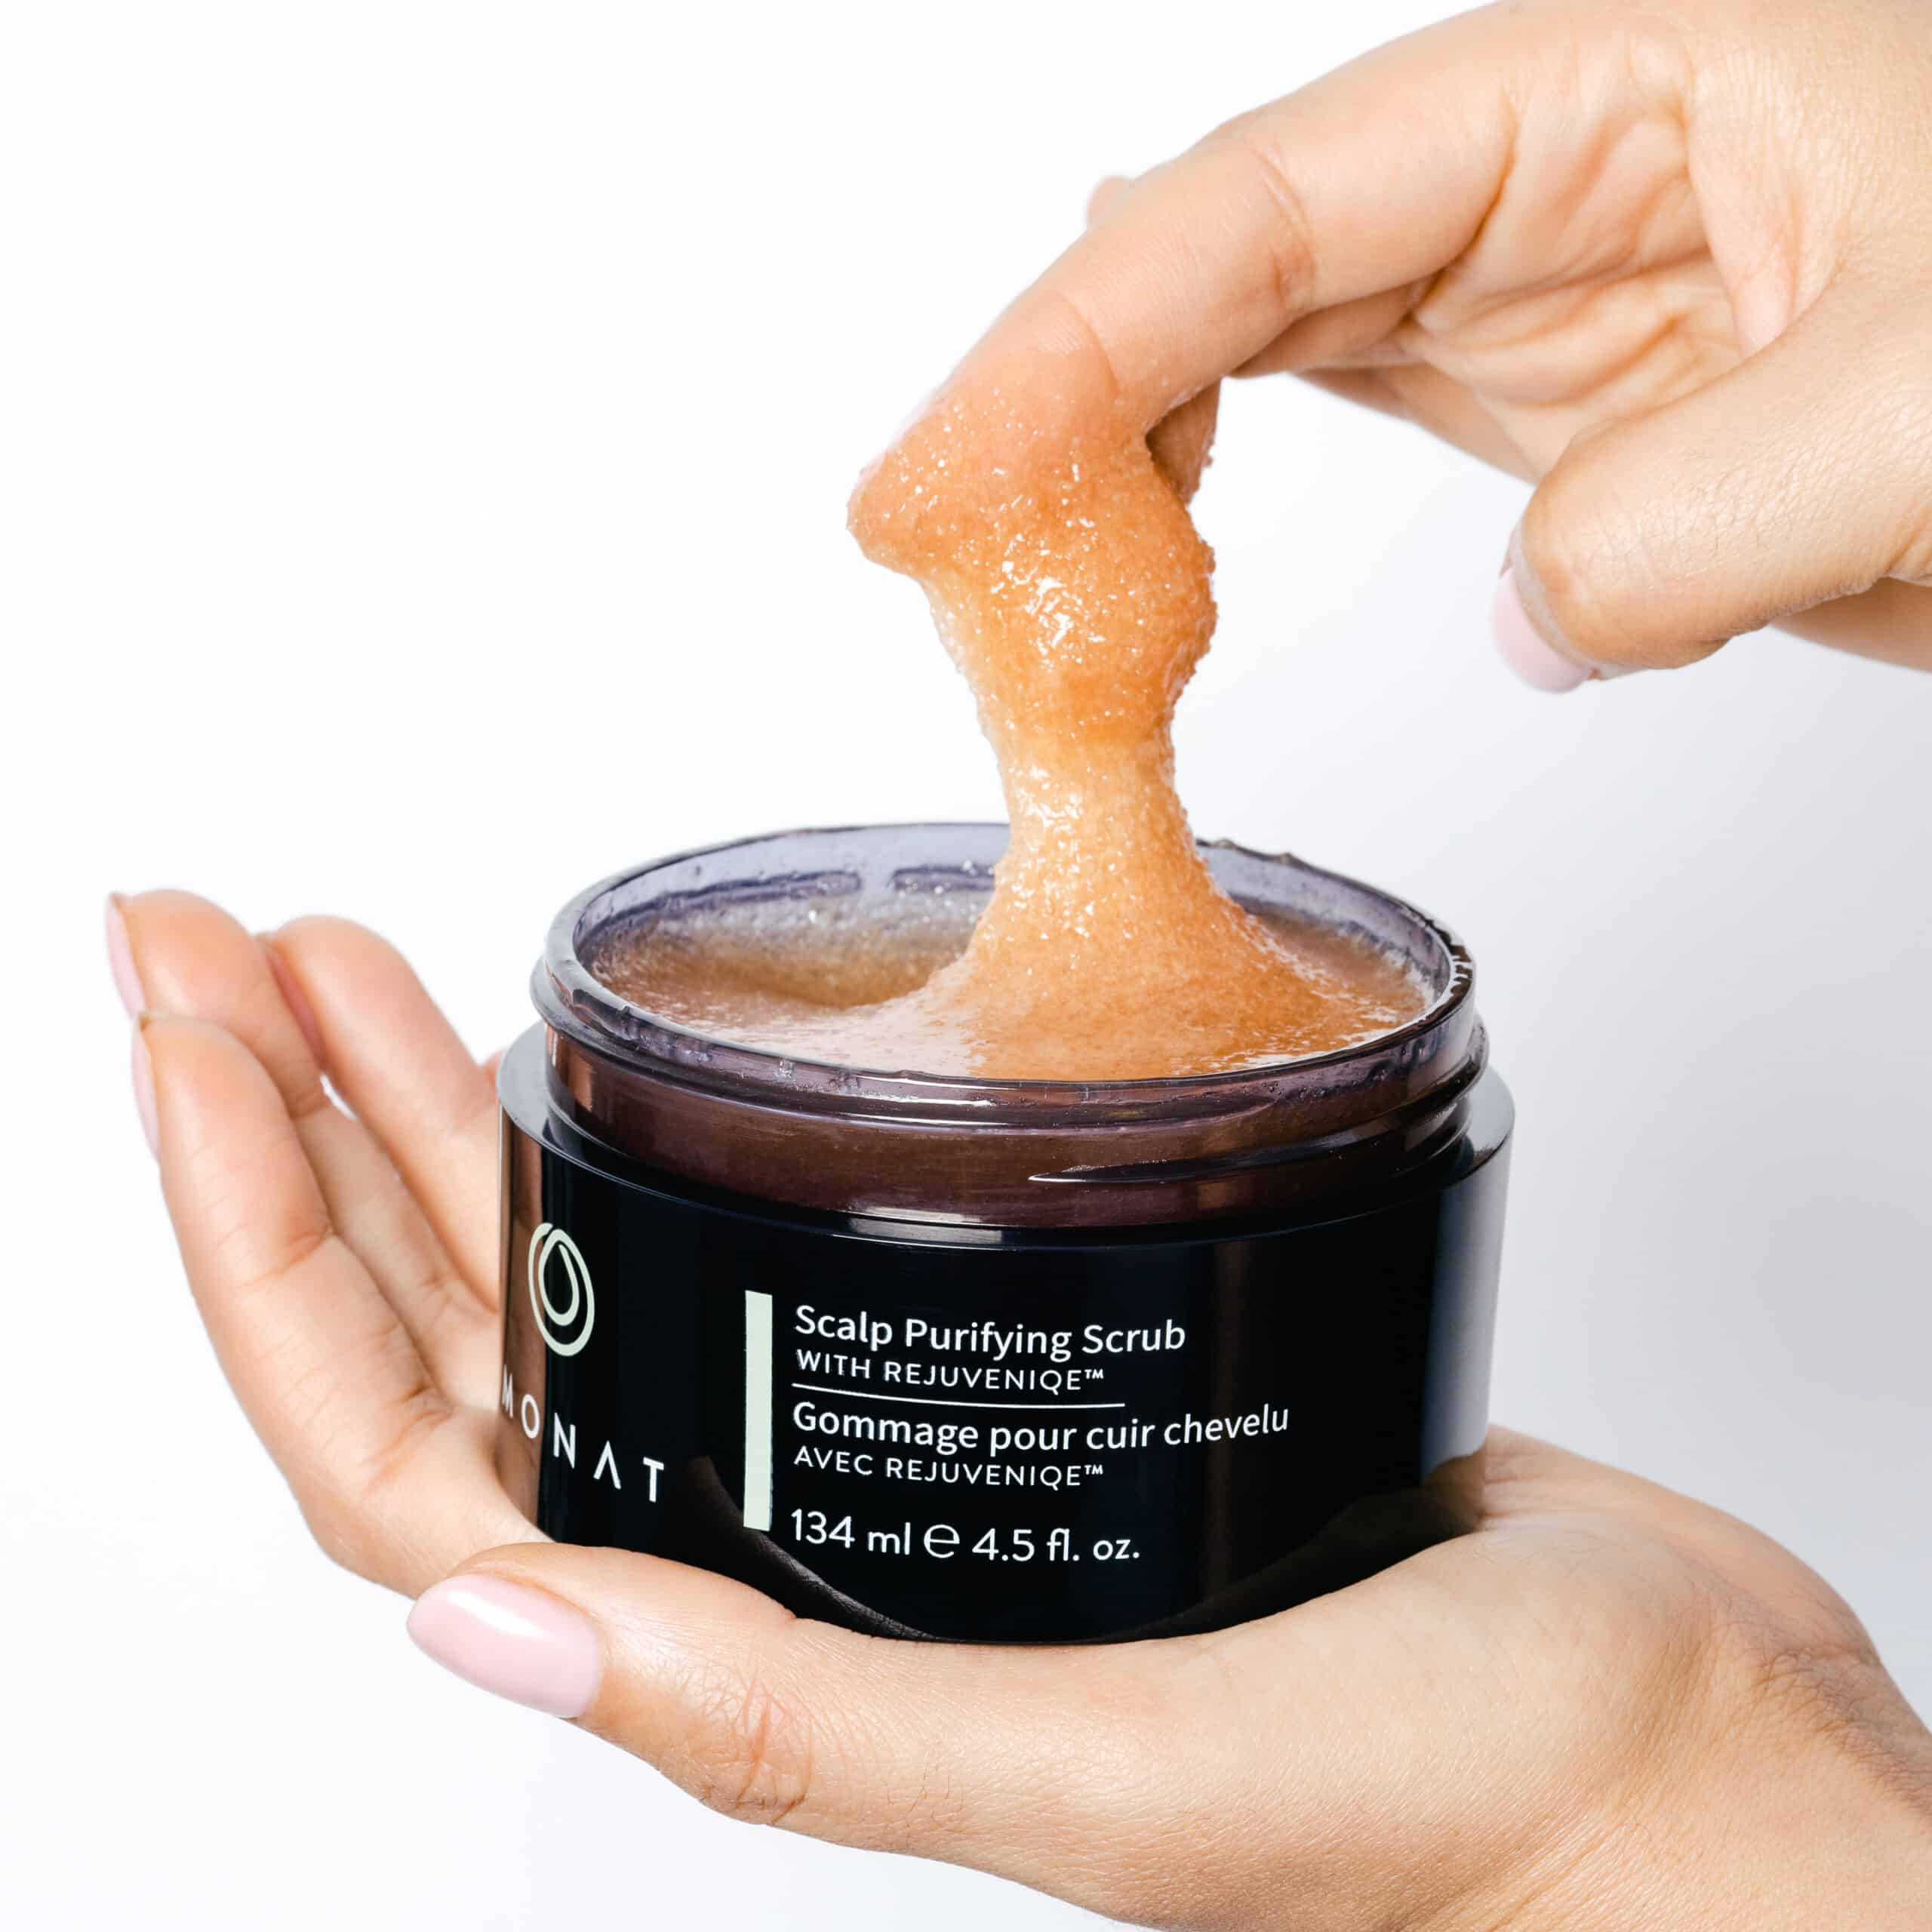 Woman's hands taking the recommended amount of Scalp Purifying Scrub out of its container.